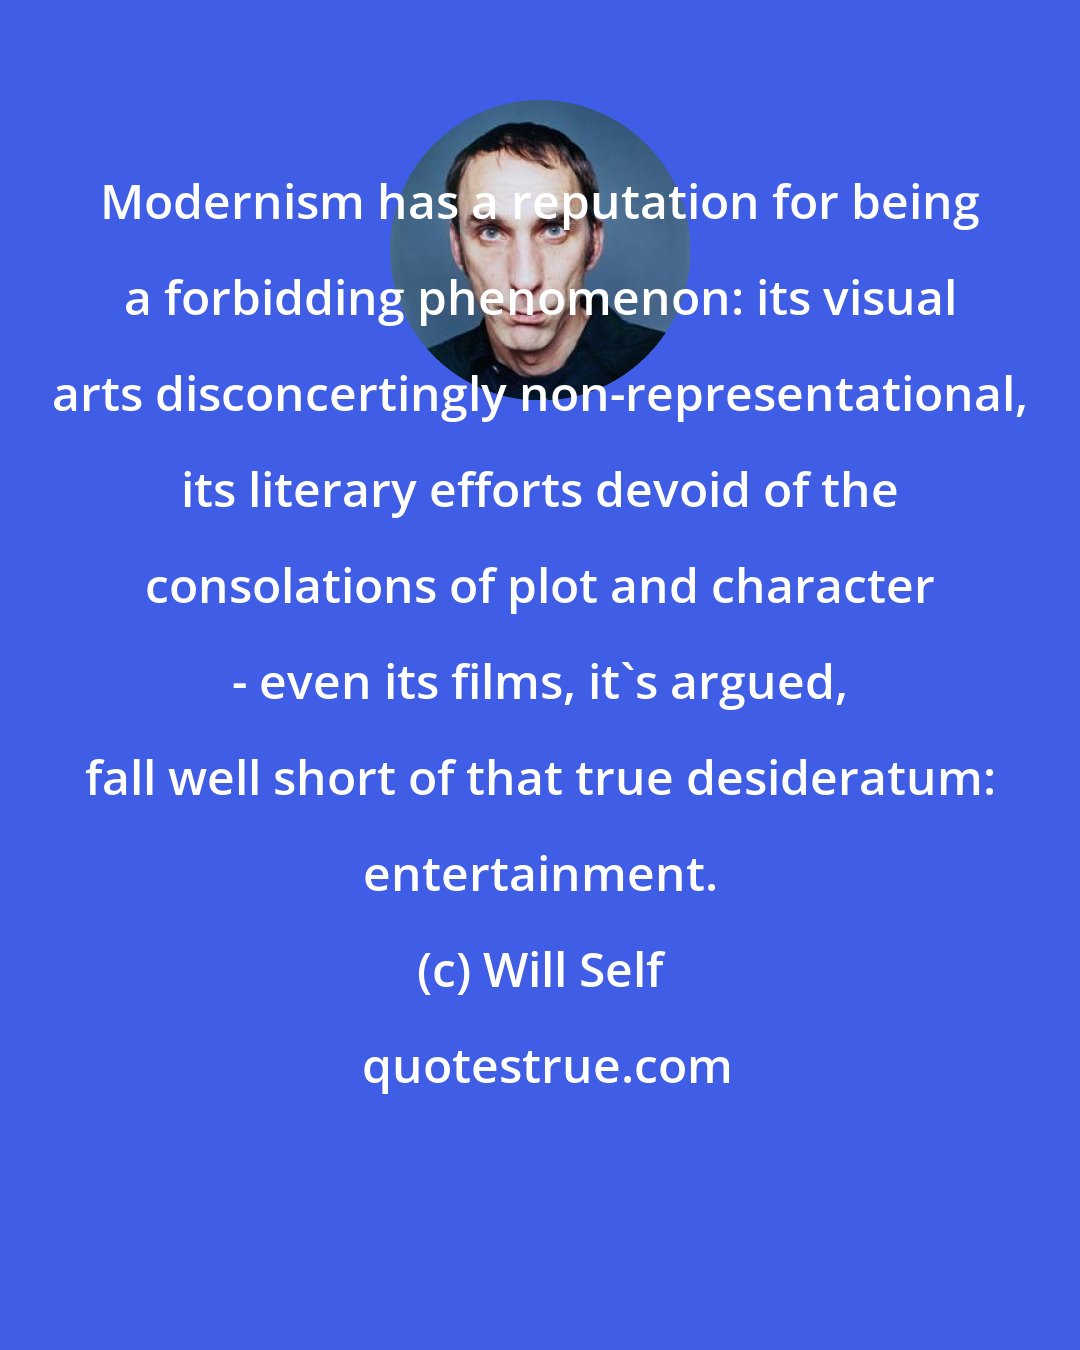 Will Self: Modernism has a reputation for being a forbidding phenomenon: its visual arts disconcertingly non-representational, its literary efforts devoid of the consolations of plot and character - even its films, it's argued, fall well short of that true desideratum: entertainment.